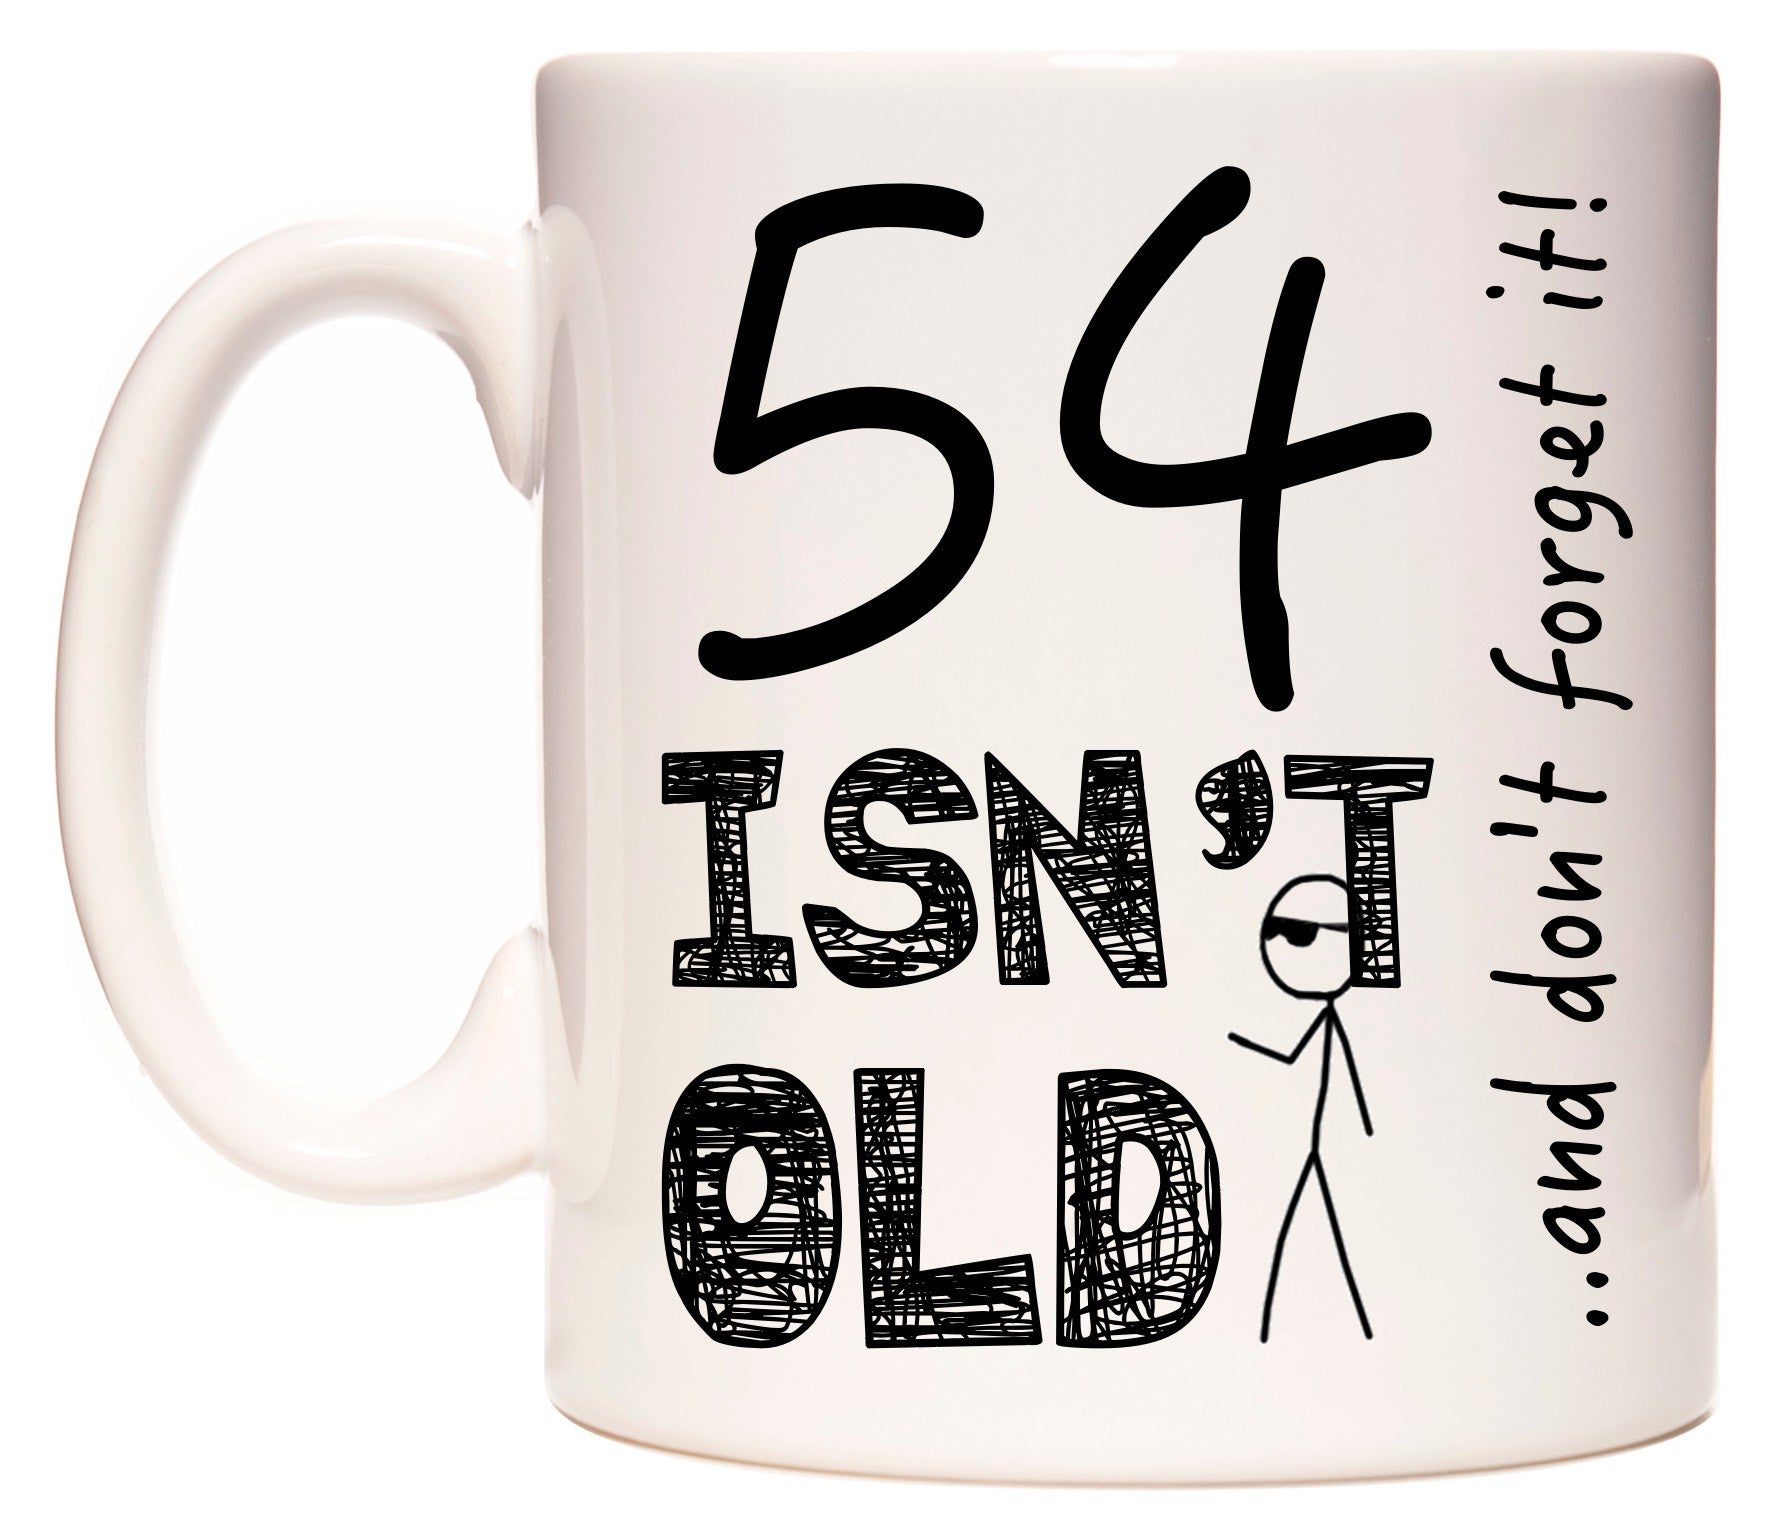 This mug features 54 Isn't Old